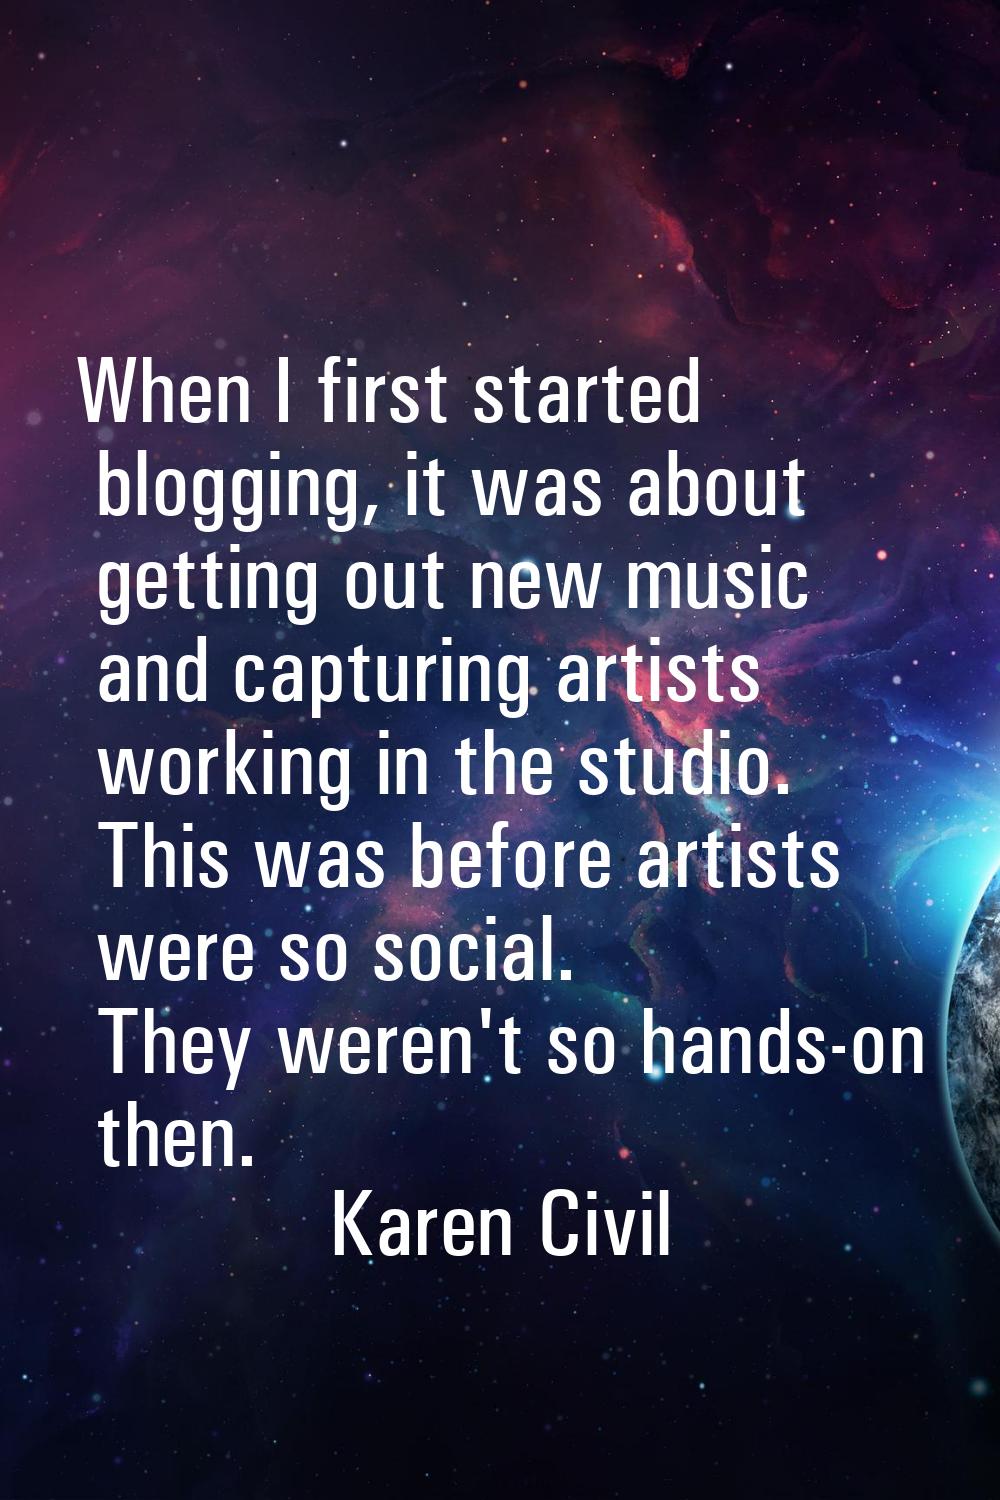 When I first started blogging, it was about getting out new music and capturing artists working in 